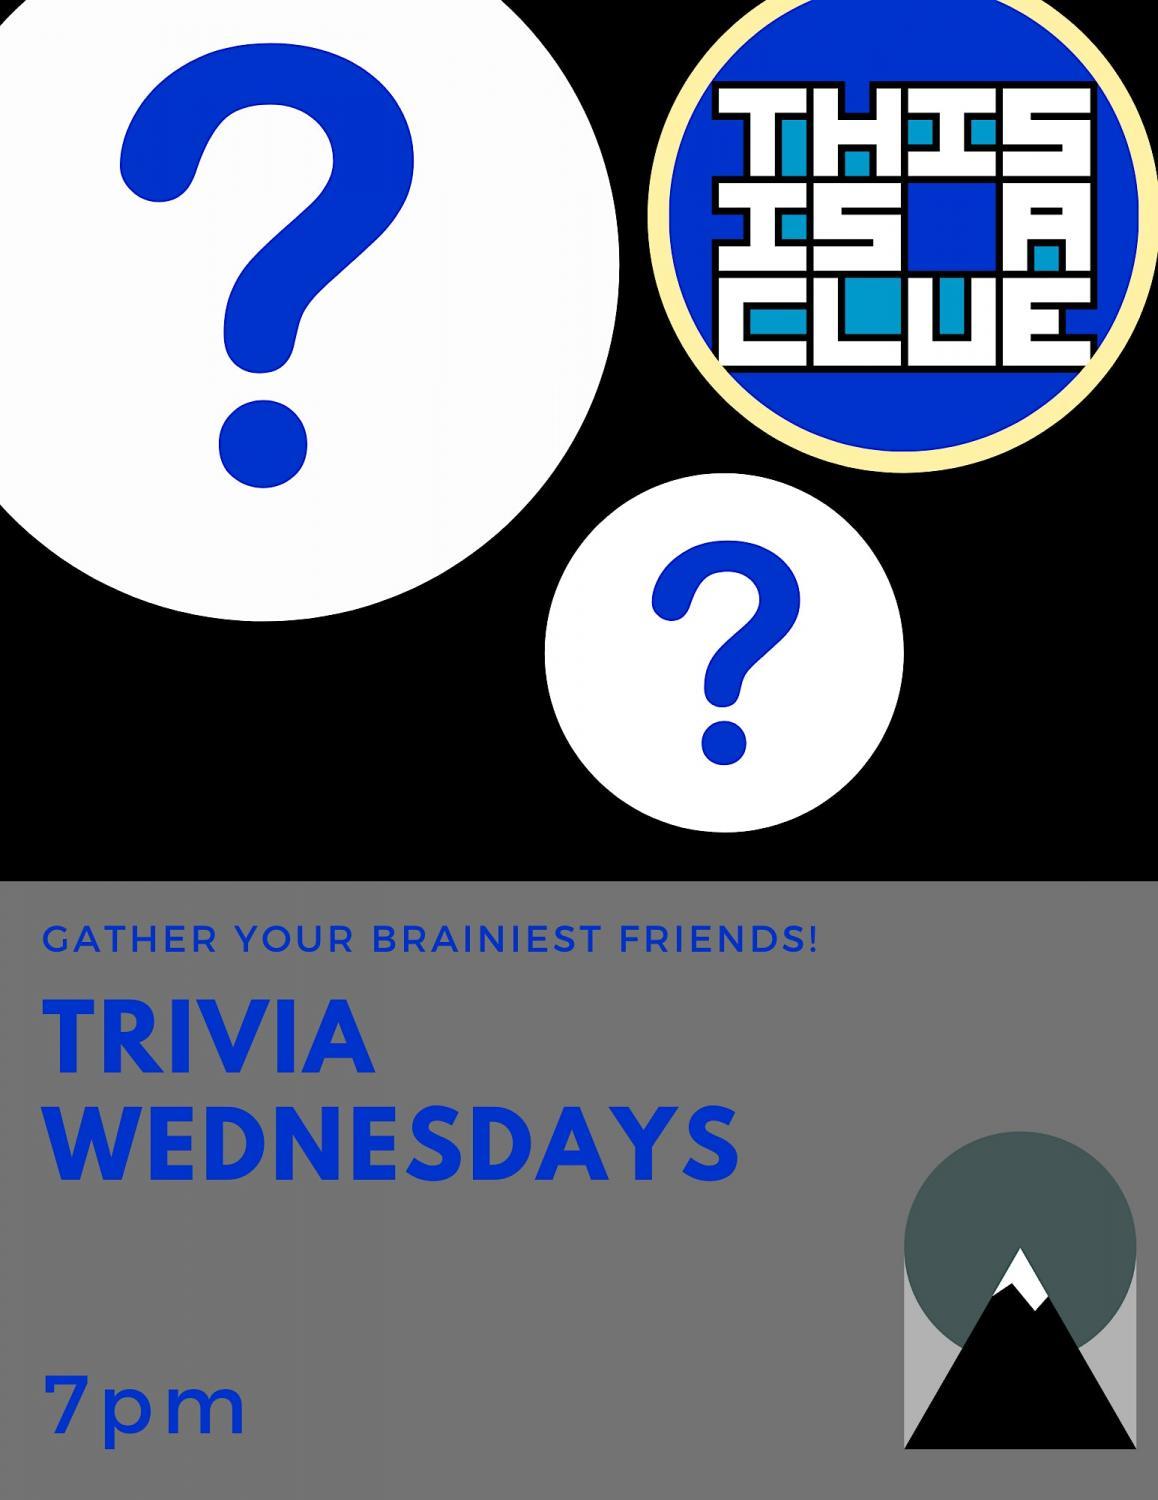 This is a Clue Trivia- Free Weekly Bar Trivia!
Thu Oct 20, 7:00 PM - Thu Oct 20, 9:00 PM